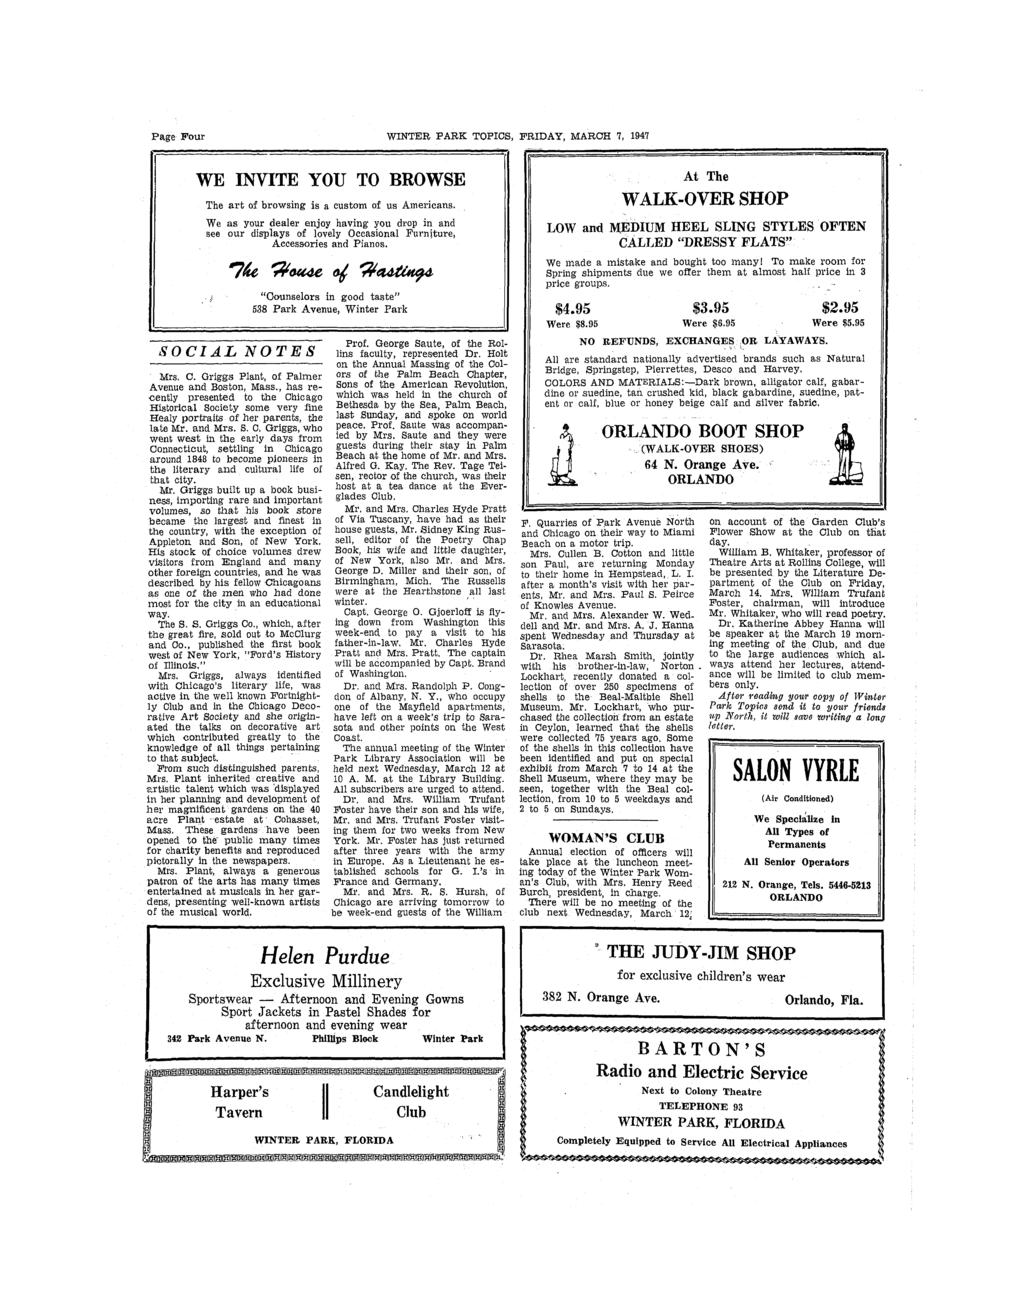 Page Four WINTER PARK TOPICS, FRIDAY, MARCH 7, 1947 WE INVITE YOU TO BROWSE The arof browsng s a cusom of us Amercans.